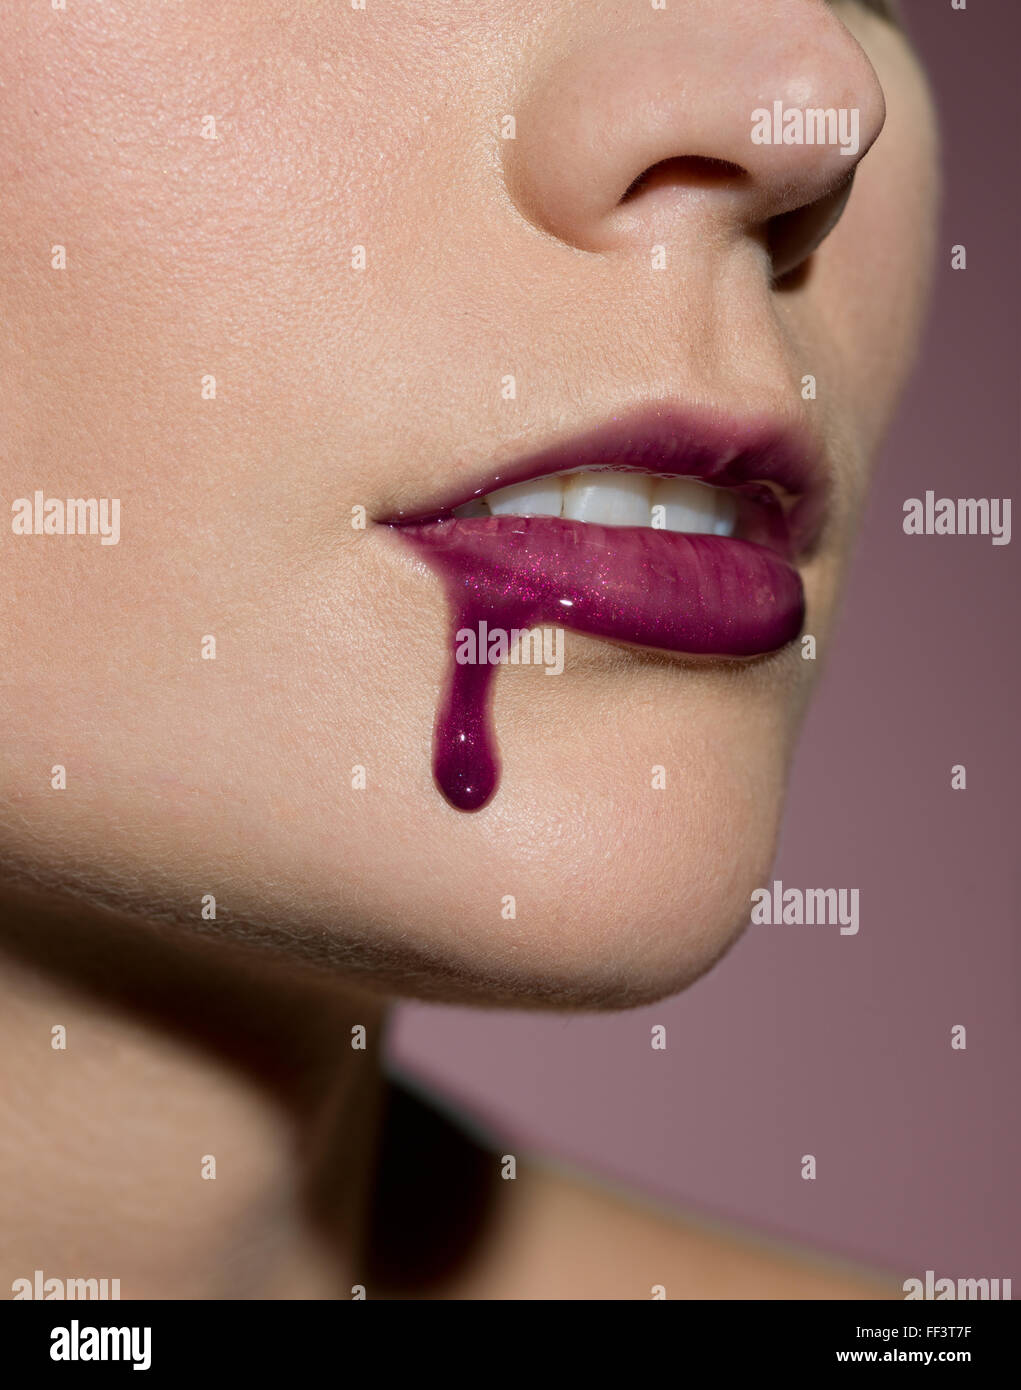 Lip gloss dripping from woman's lip Stock Photo